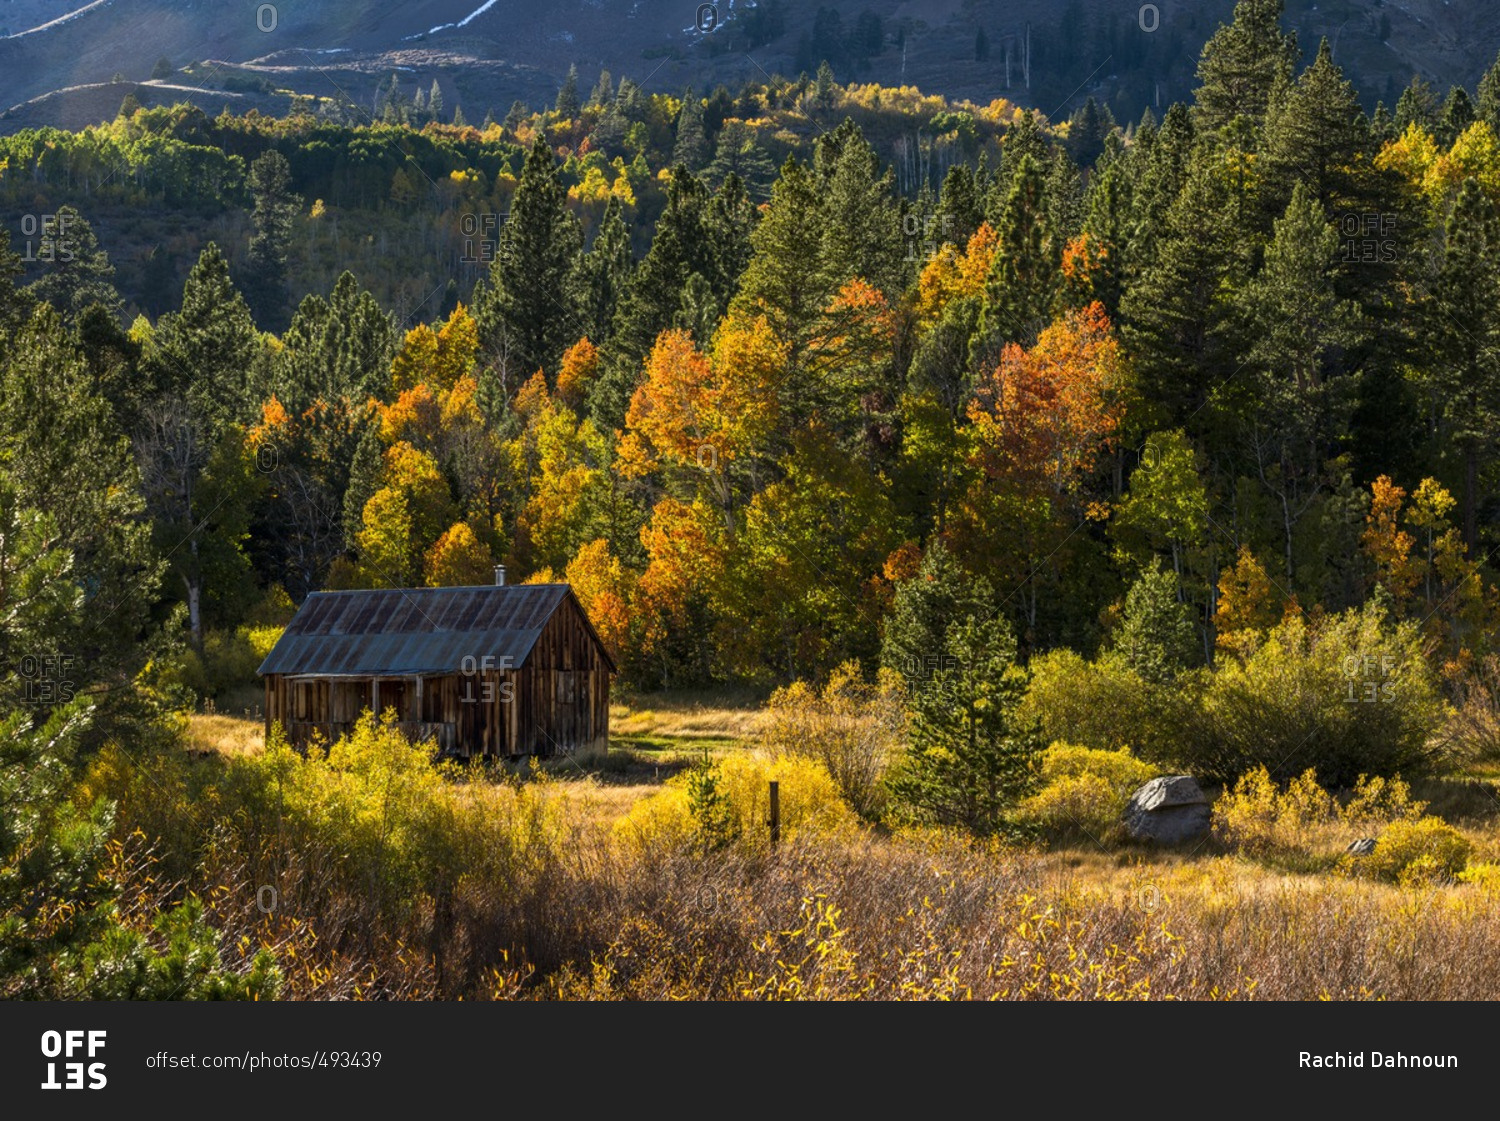 A small old cabin is surrounded by beautiful fall foliage in autumn in Hope Valley, California.